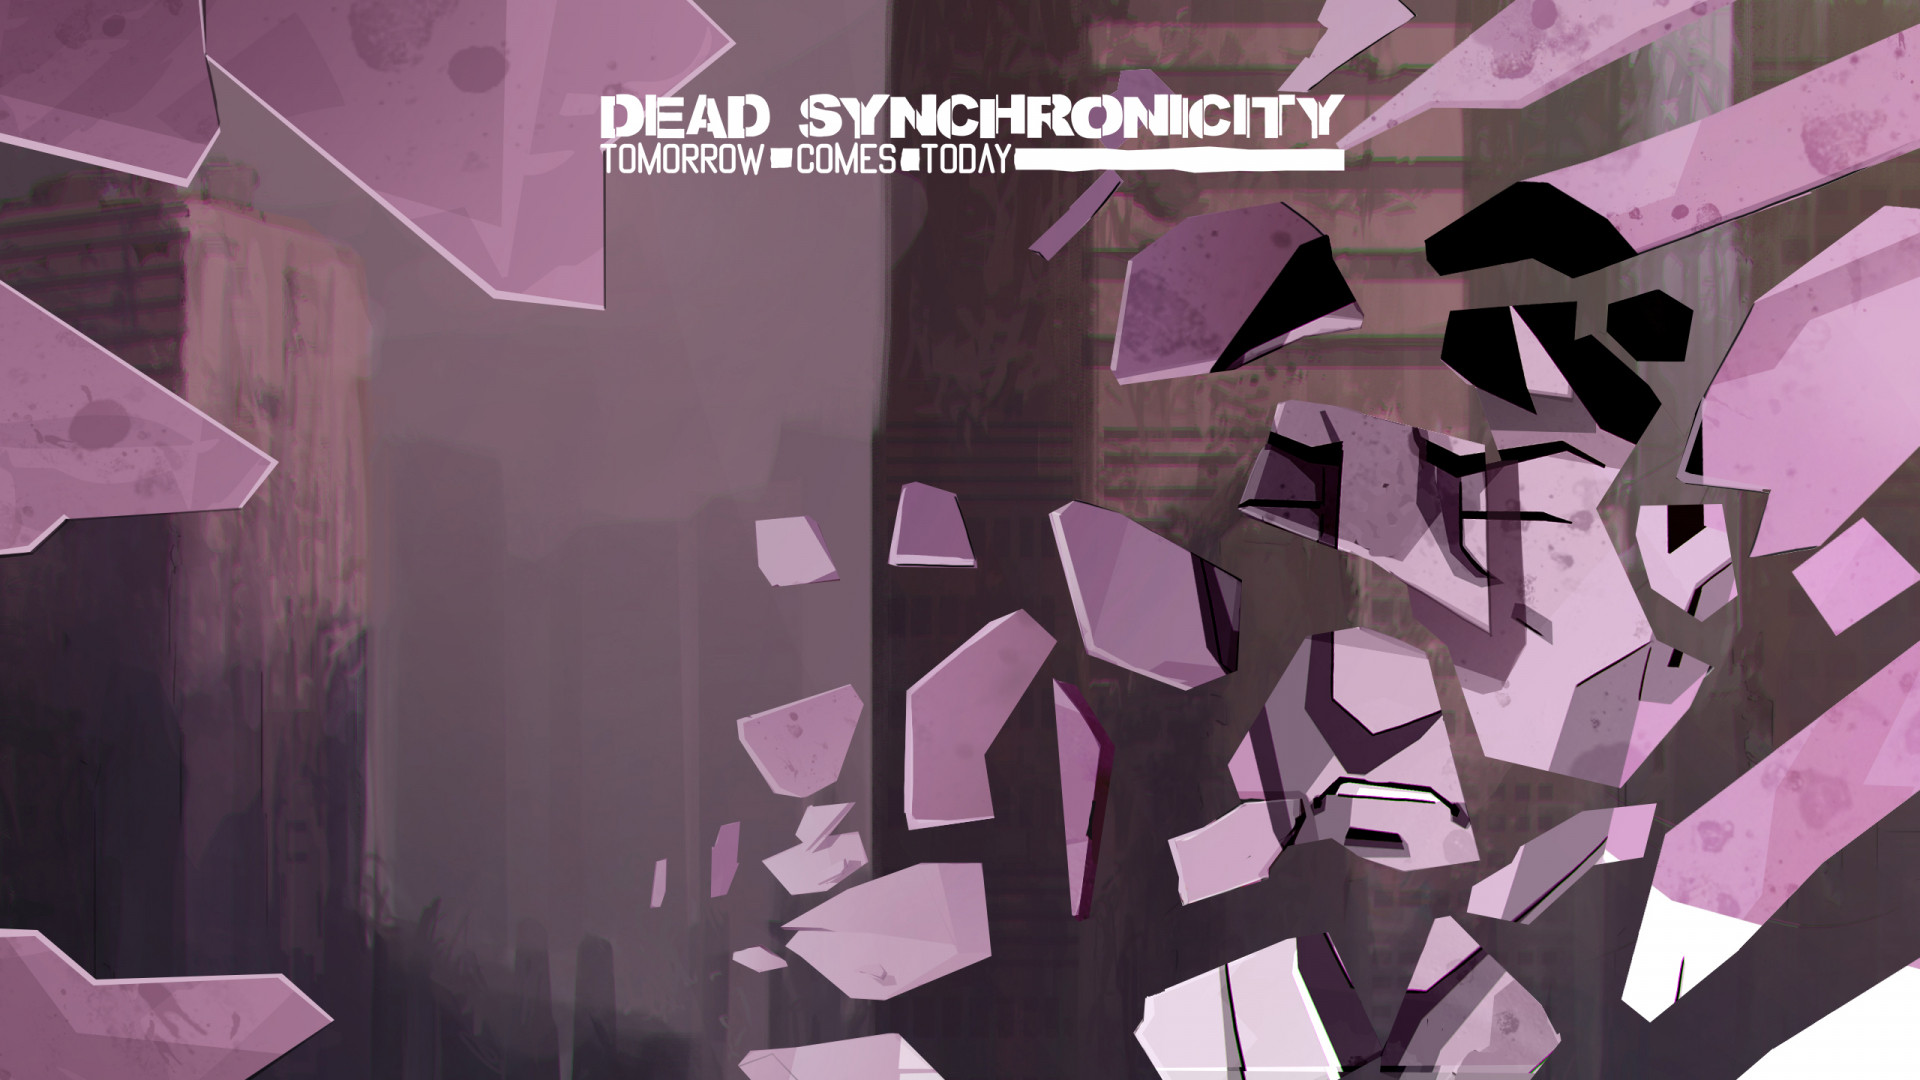 I can come tomorrow. Dead Synchronicity tomorrow comes today ps4.